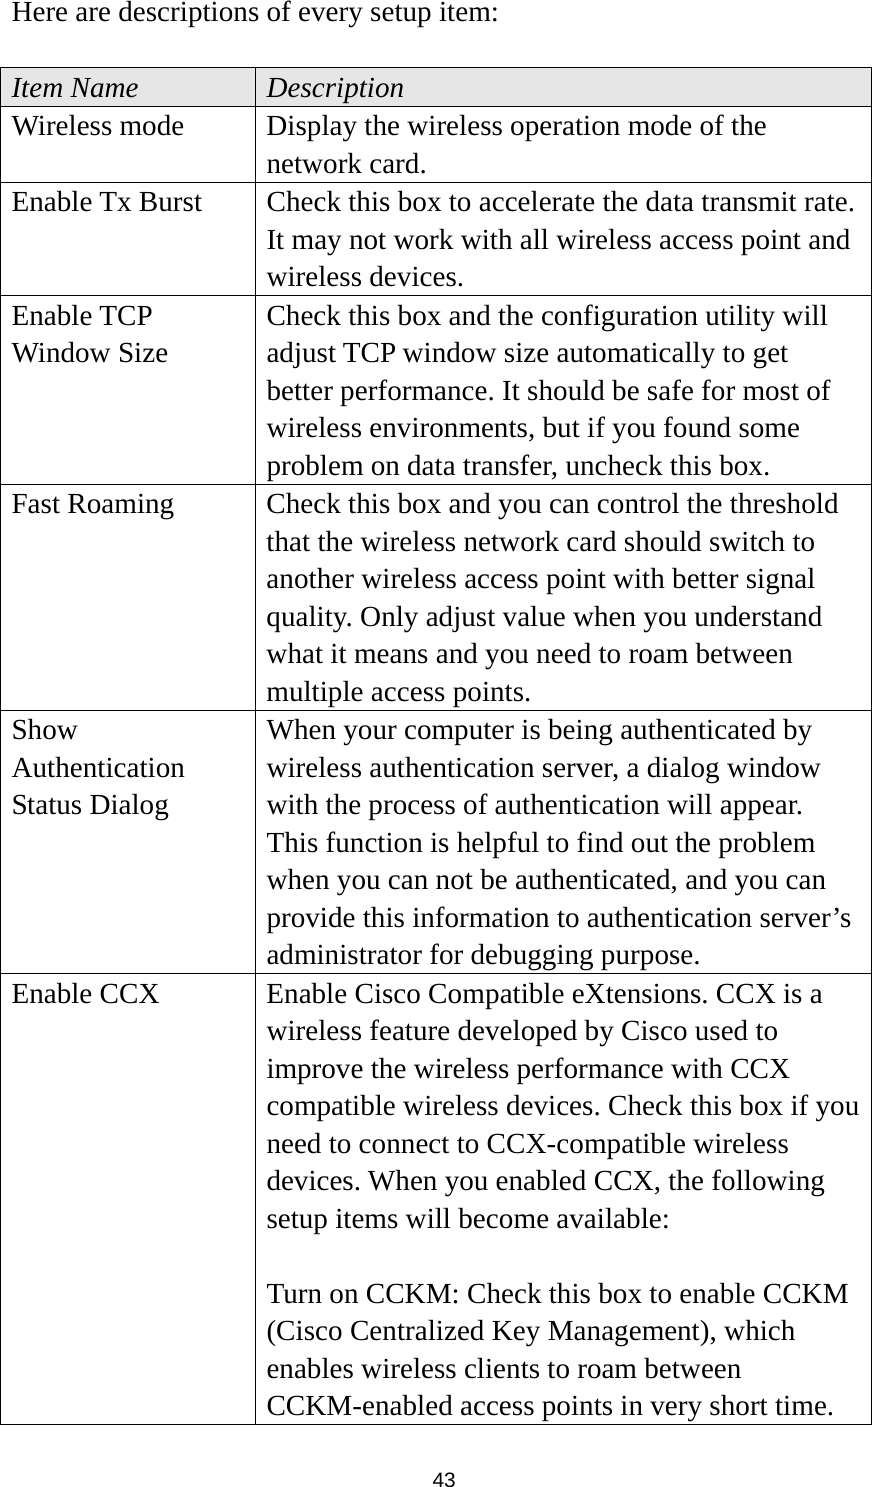  43 Here are descriptions of every setup item:  Item Name  Description Wireless mode  Display the wireless operation mode of the network card. Enable Tx Burst  Check this box to accelerate the data transmit rate. It may not work with all wireless access point and wireless devices. Enable TCP Window Size Check this box and the configuration utility will adjust TCP window size automatically to get better performance. It should be safe for most of wireless environments, but if you found some problem on data transfer, uncheck this box. Fast Roaming  Check this box and you can control the threshold that the wireless network card should switch to another wireless access point with better signal quality. Only adjust value when you understand what it means and you need to roam between multiple access points. Show Authentication Status Dialog When your computer is being authenticated by wireless authentication server, a dialog window with the process of authentication will appear. This function is helpful to find out the problem when you can not be authenticated, and you can provide this information to authentication server’s administrator for debugging purpose. Enable CCX  Enable Cisco Compatible eXtensions. CCX is a wireless feature developed by Cisco used to improve the wireless performance with CCX compatible wireless devices. Check this box if you need to connect to CCX-compatible wireless devices. When you enabled CCX, the following setup items will become available:  Turn on CCKM: Check this box to enable CCKM (Cisco Centralized Key Management), which enables wireless clients to roam between CCKM-enabled access points in very short time. 